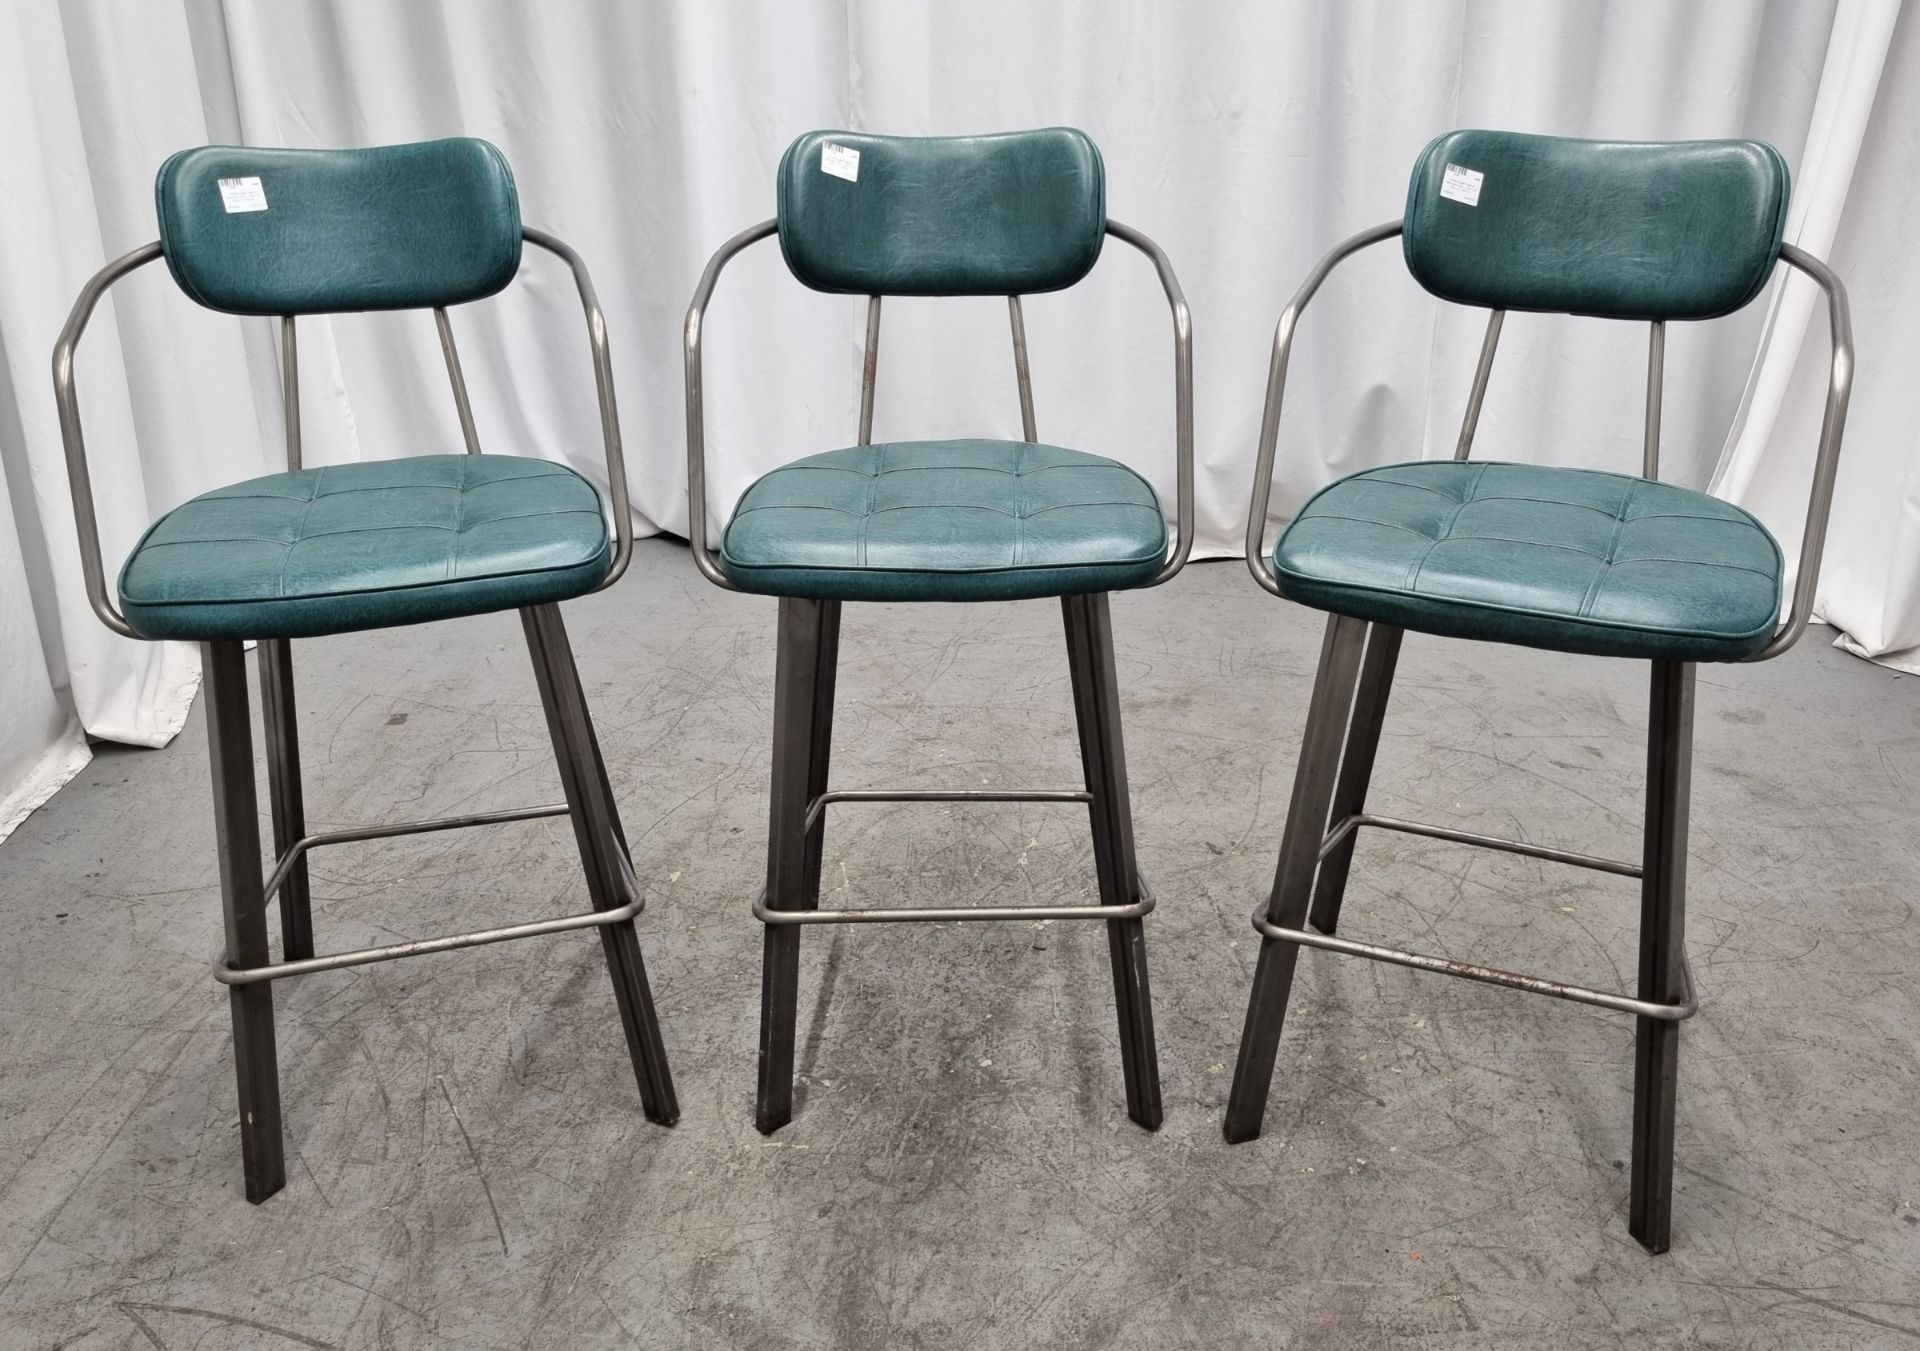 3x Industrial green leather restaurant chairs - L 550 x W 600 x H 1100mm